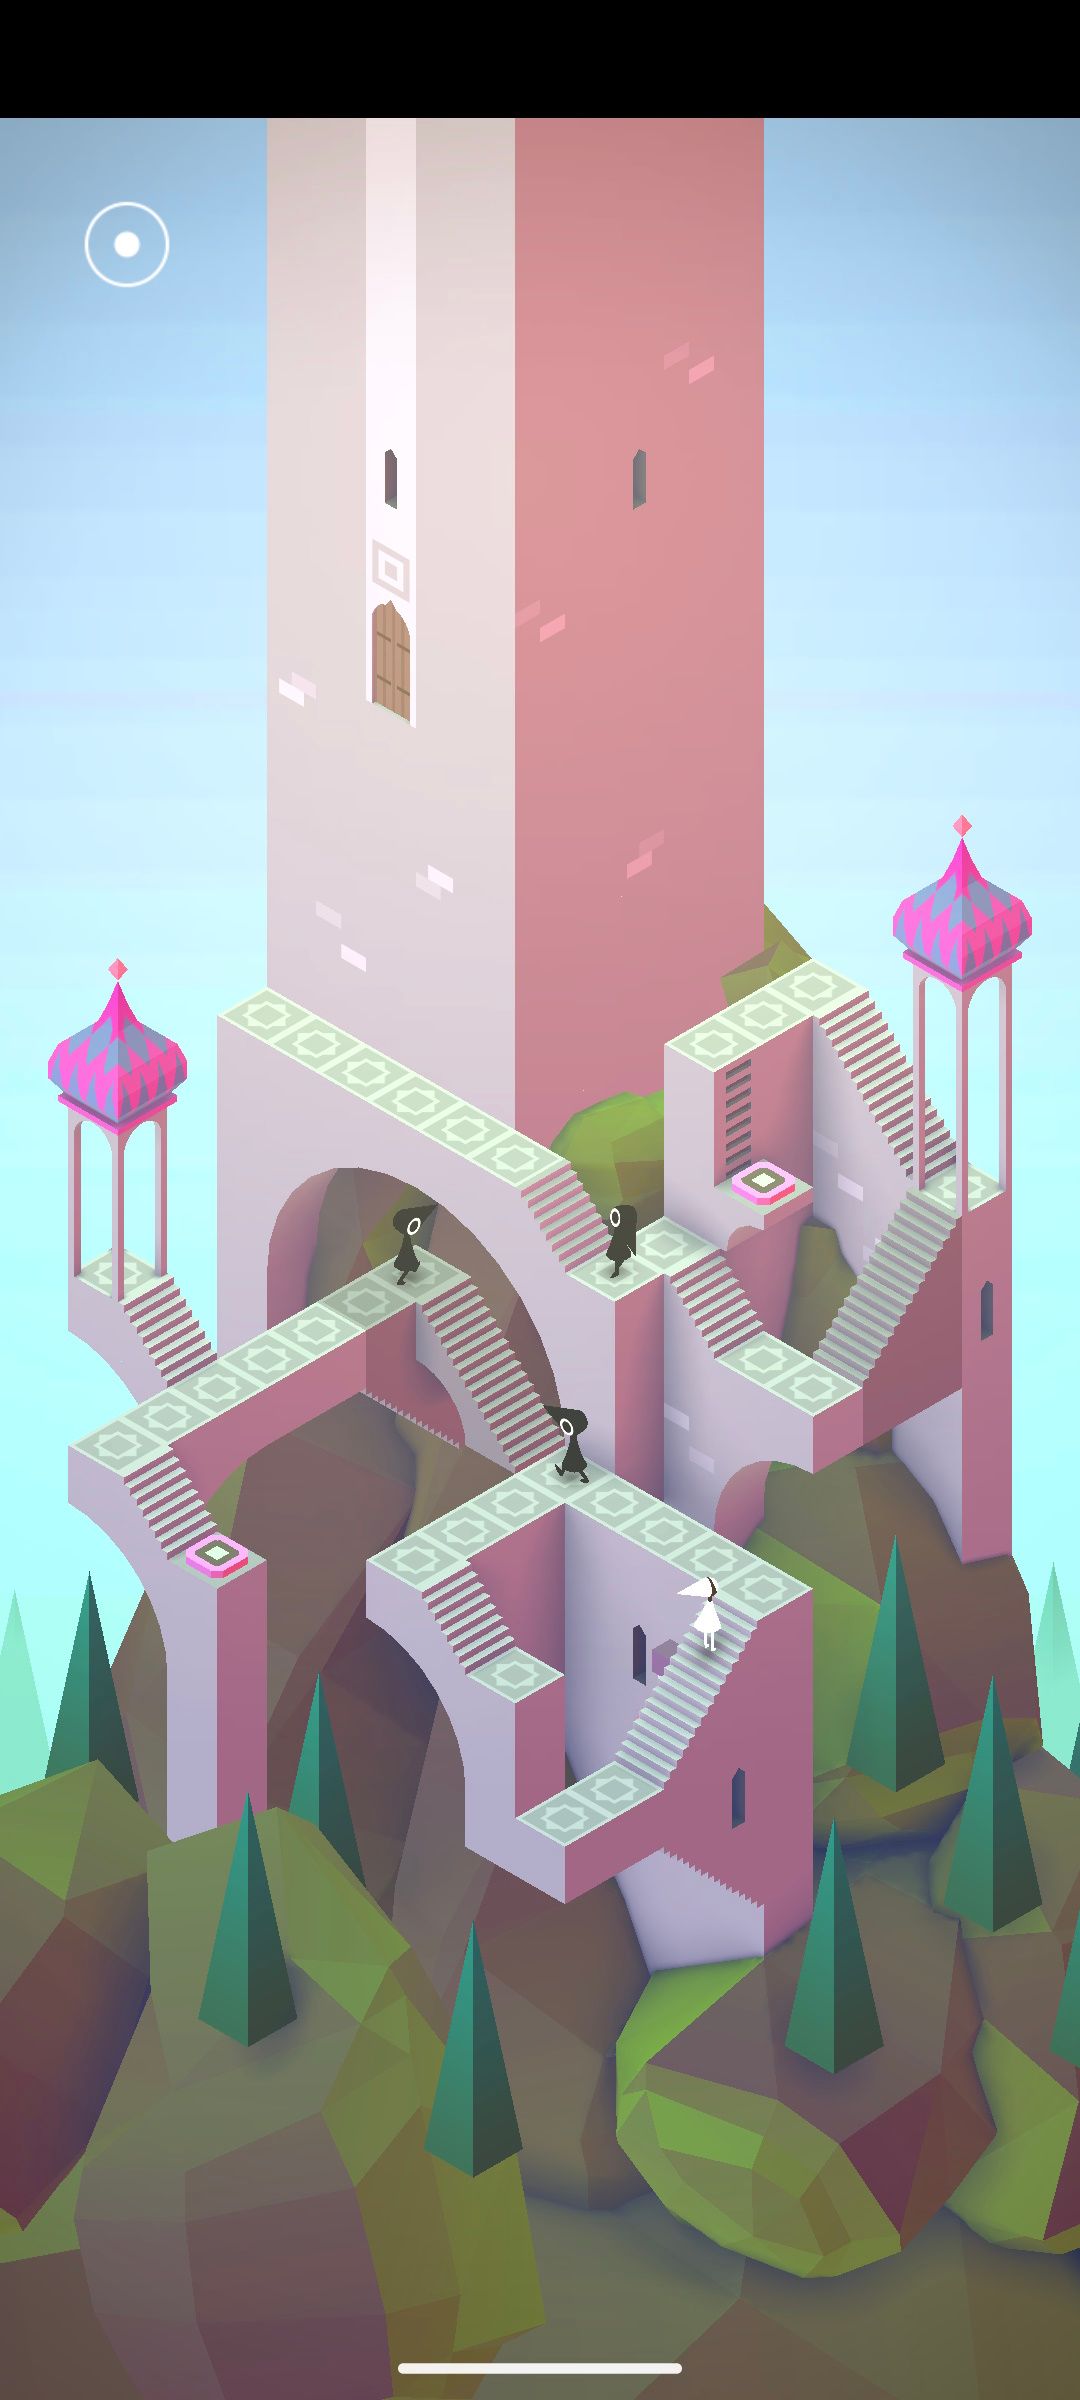 Avoiding the Crow People in Monument Valley